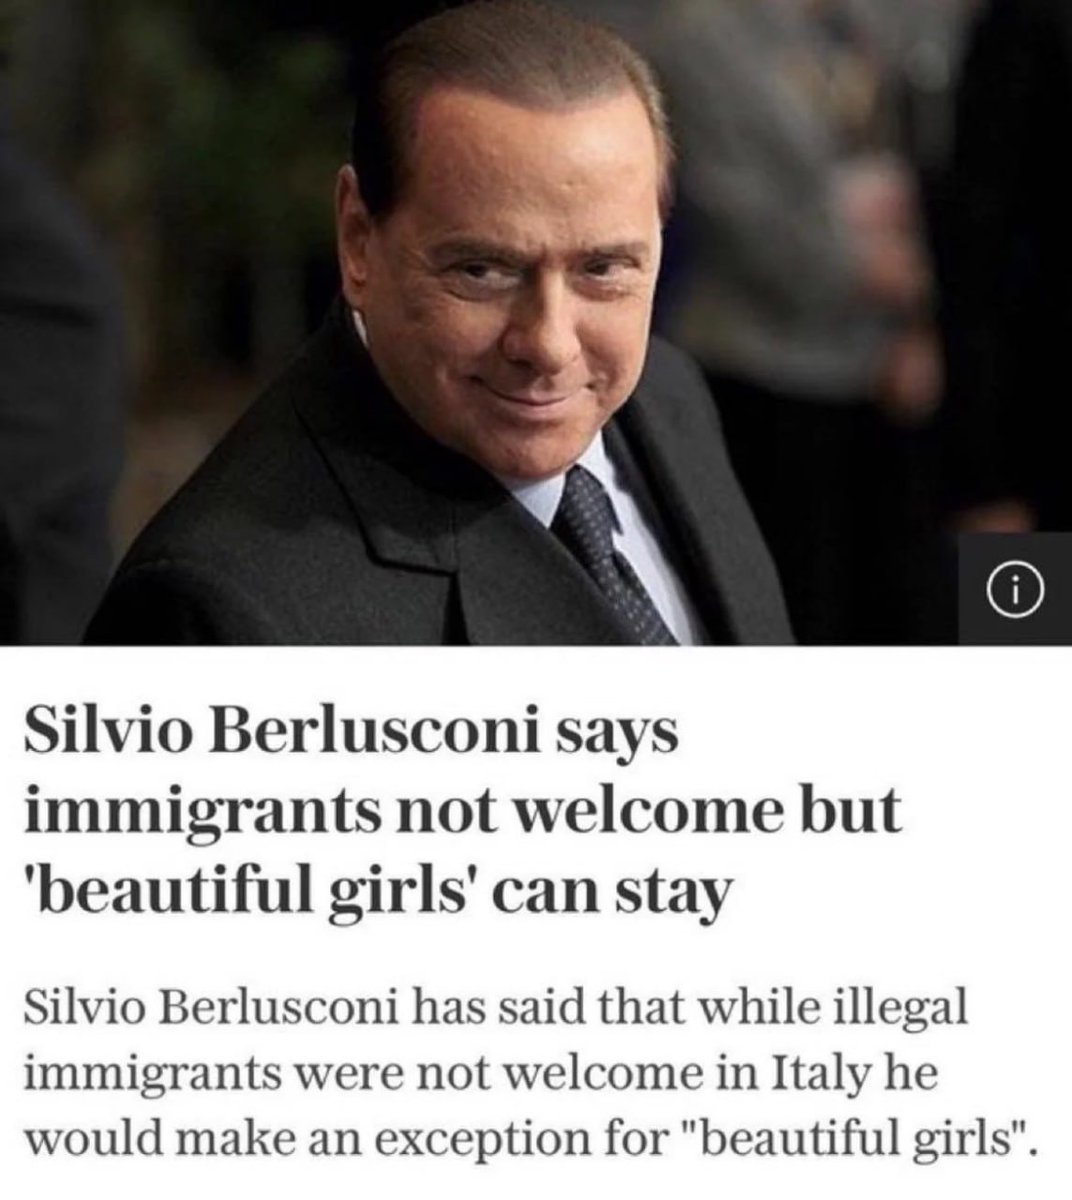 berlusconi beautiful girls can stay - i Silvio Berlusconi says immigrants not welcome but 'beautiful girls' can stay Silvio Berlusconi has said that while illegal immigrants were not welcome in Italy he would make an exception for "beautiful girls".